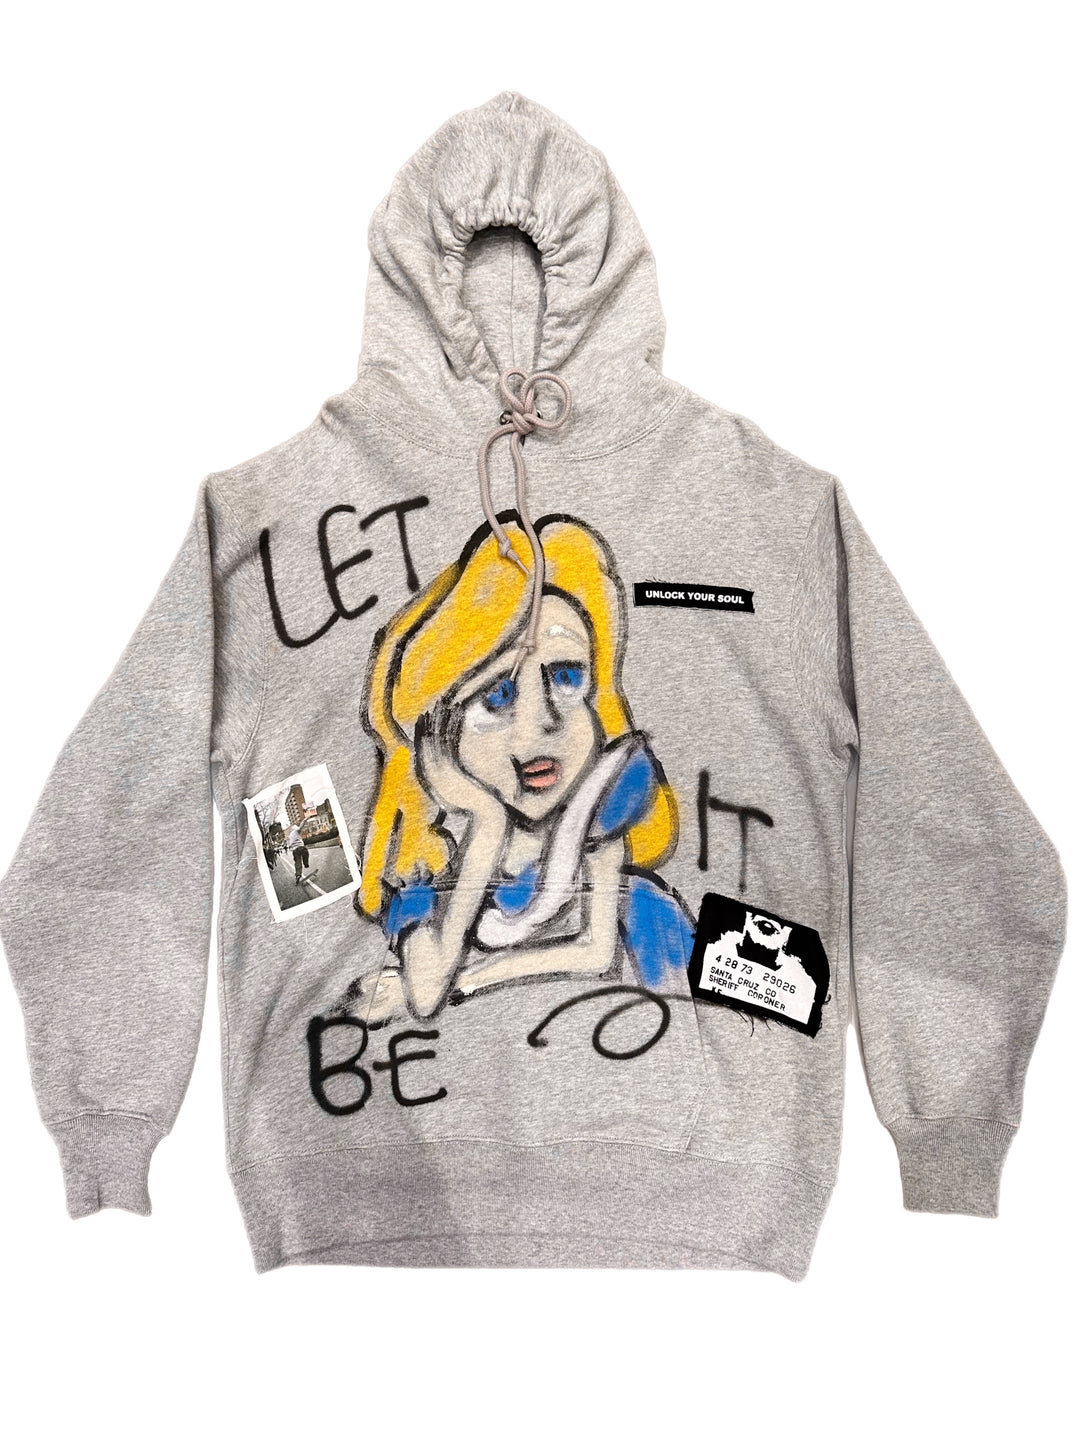 3NYCONCEPT.COM - LET IT BE GUERNIKA HOODIE